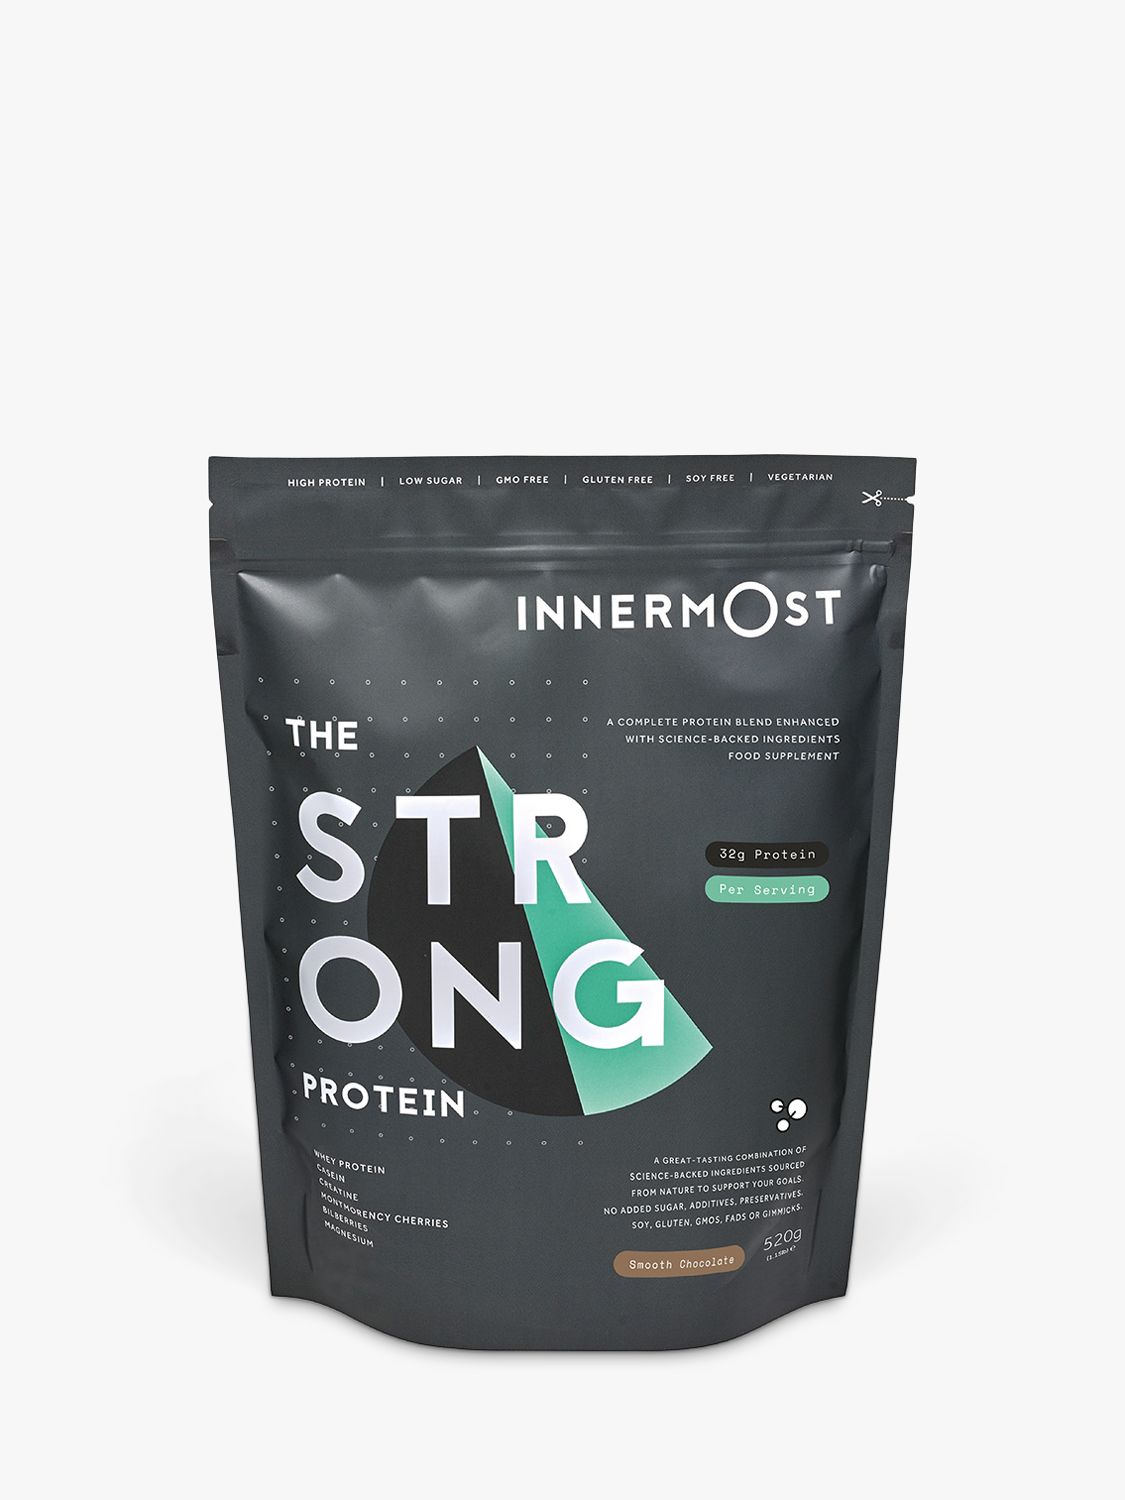 Innermost The Strong Protein Chocolate, 520g 1